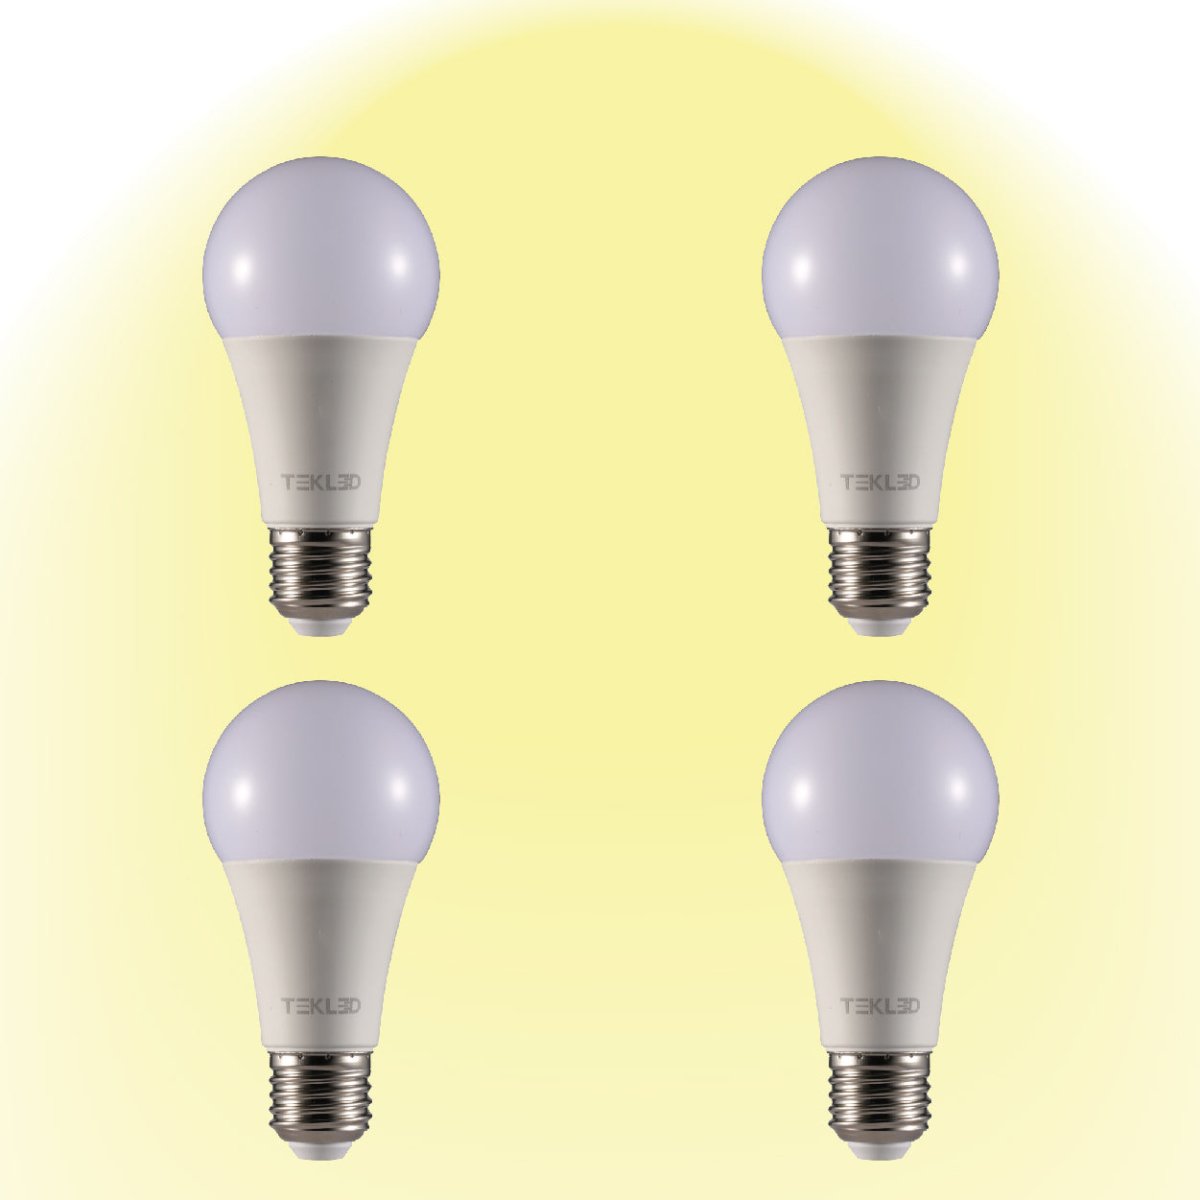 Virgo LED GLS Bulb A60 Dimmable E27 Edison Screw 2700K Warm White 9 W Pack of 4 527-156244